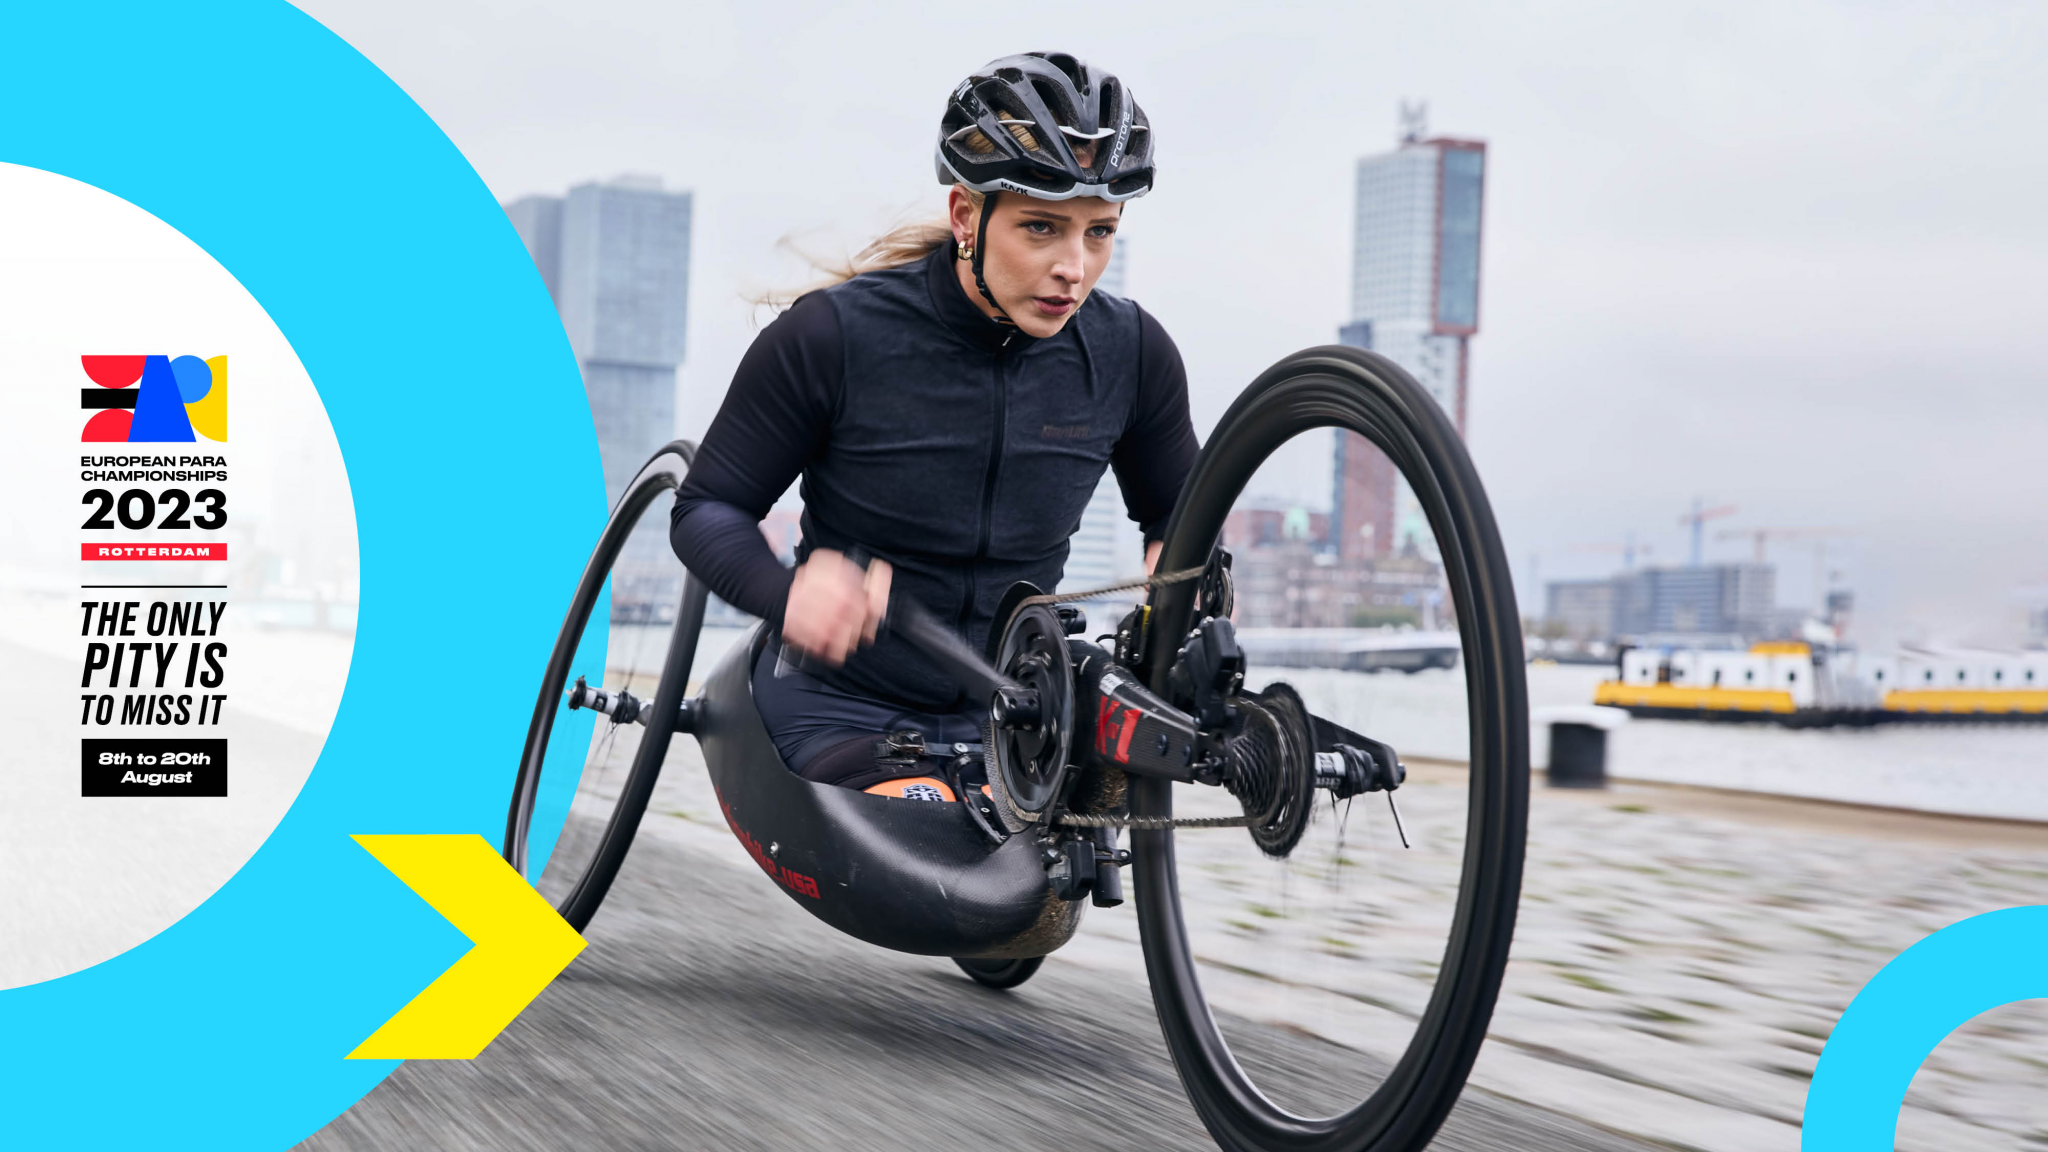 Ticket sales have been launched for the first  European Para Championships in Rotterdam later this year ©Rotterdam 2023